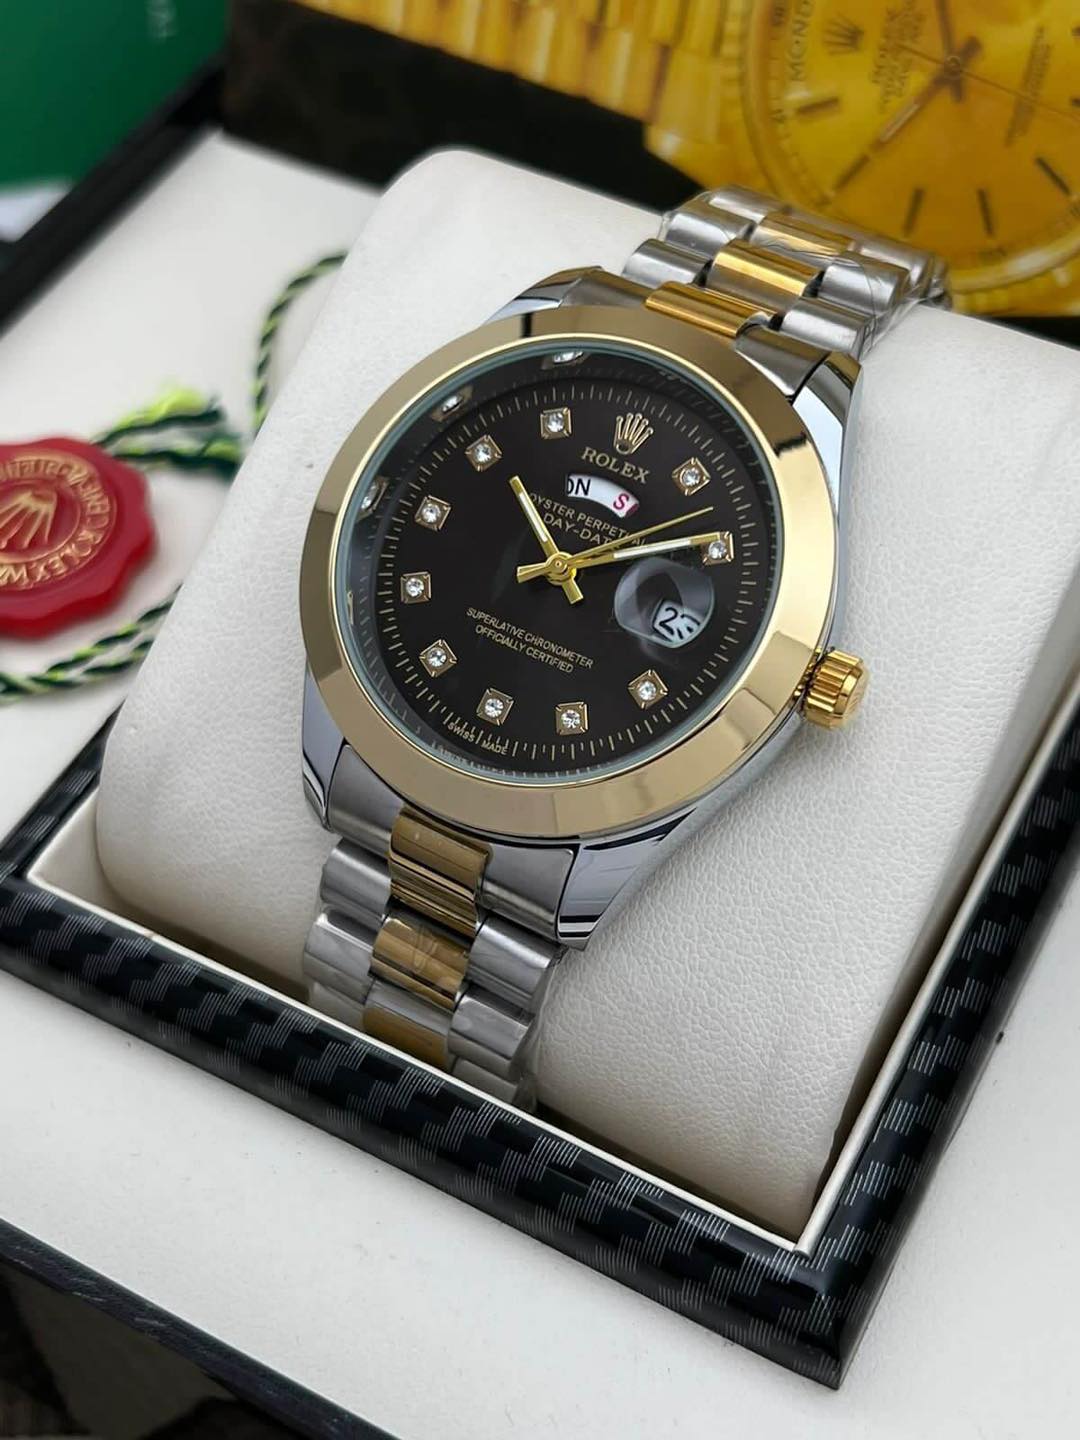 ROLEX Watch – HIGH COPY! Limited Stock!